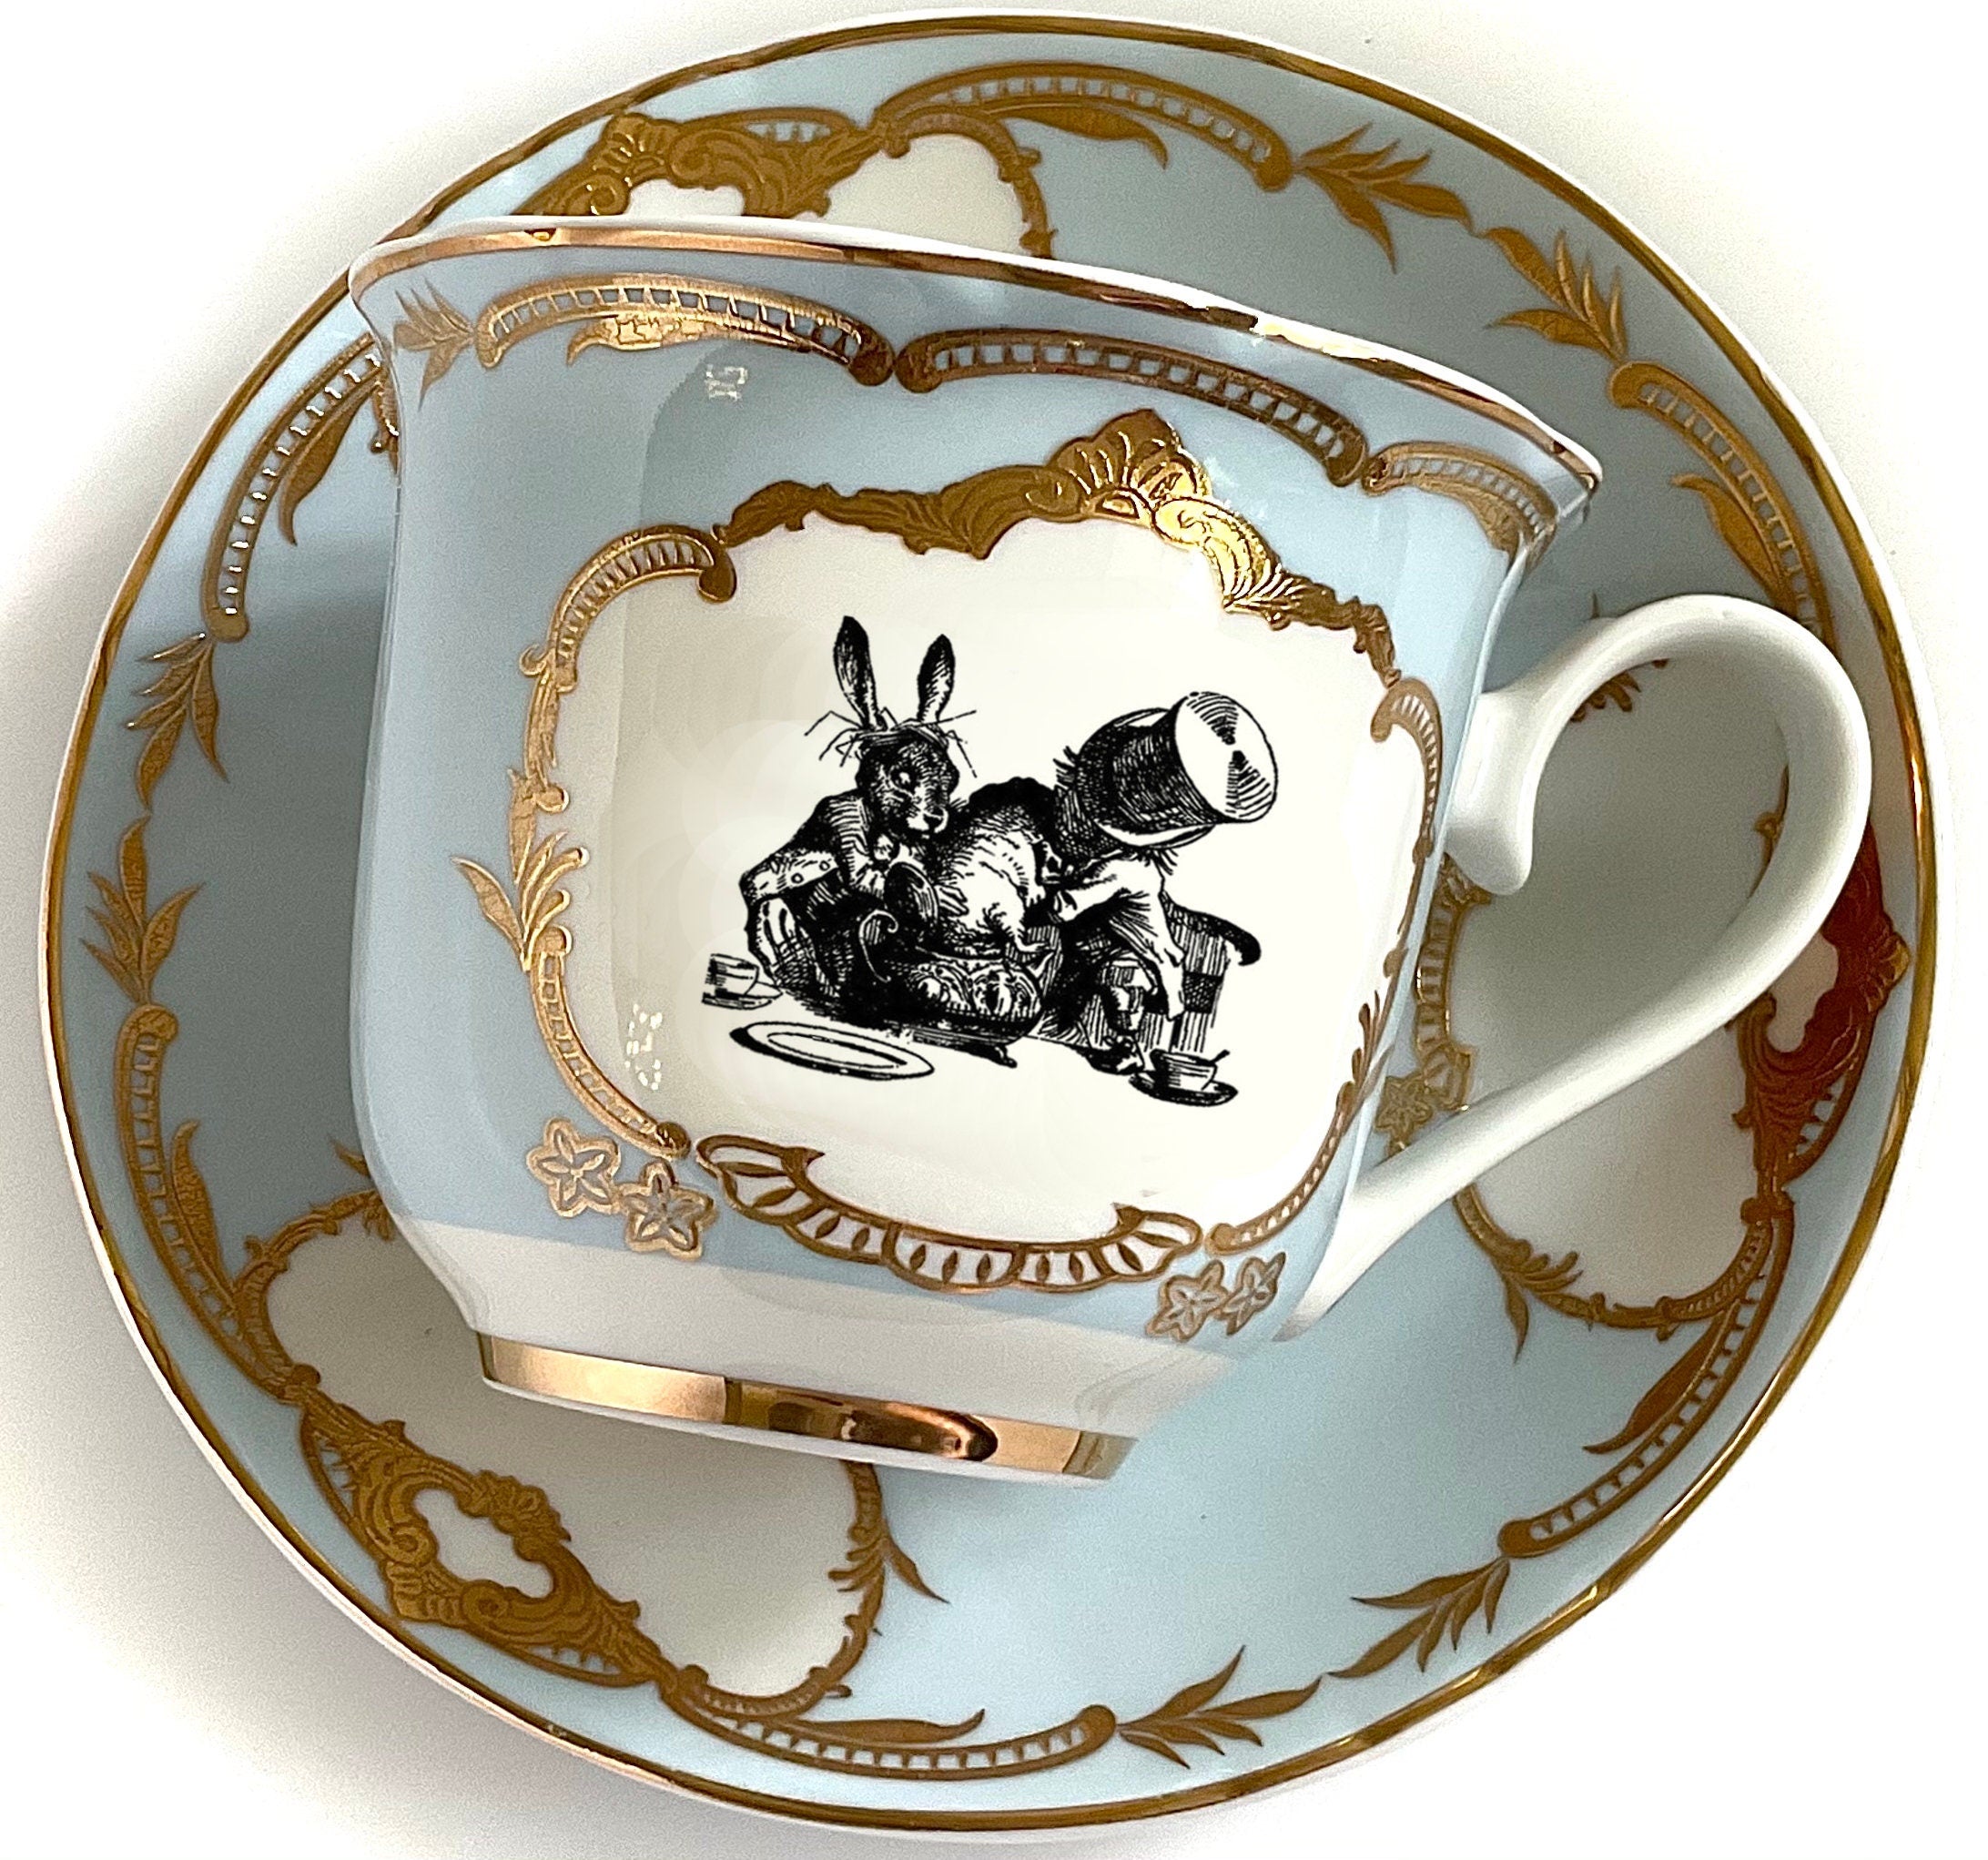 Alice in Wonderland Teacup and Saucer Set, 8 Ounces. Green, Blue or Pink  for Your Mad Hatter Tea Party 